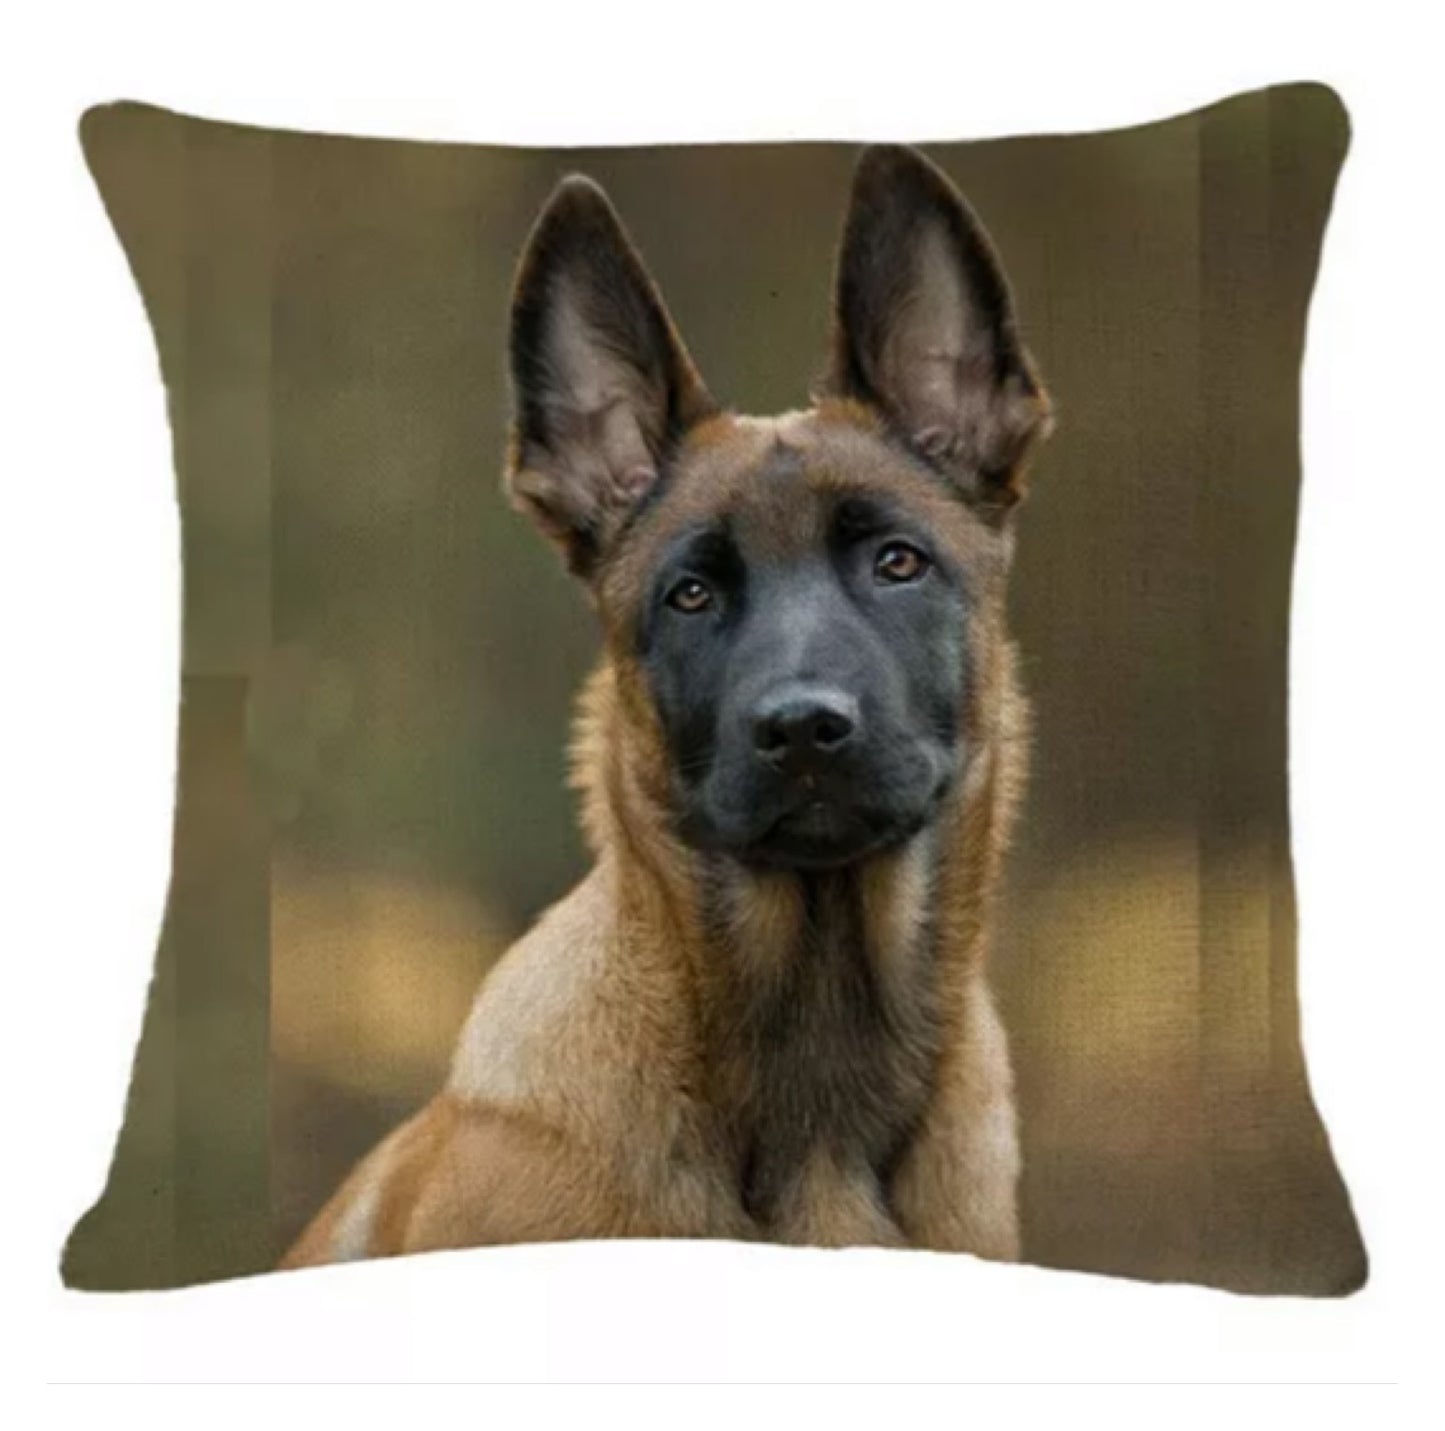 Cushion Pillow German Shepherd Dog Lucy - The Renmy Store